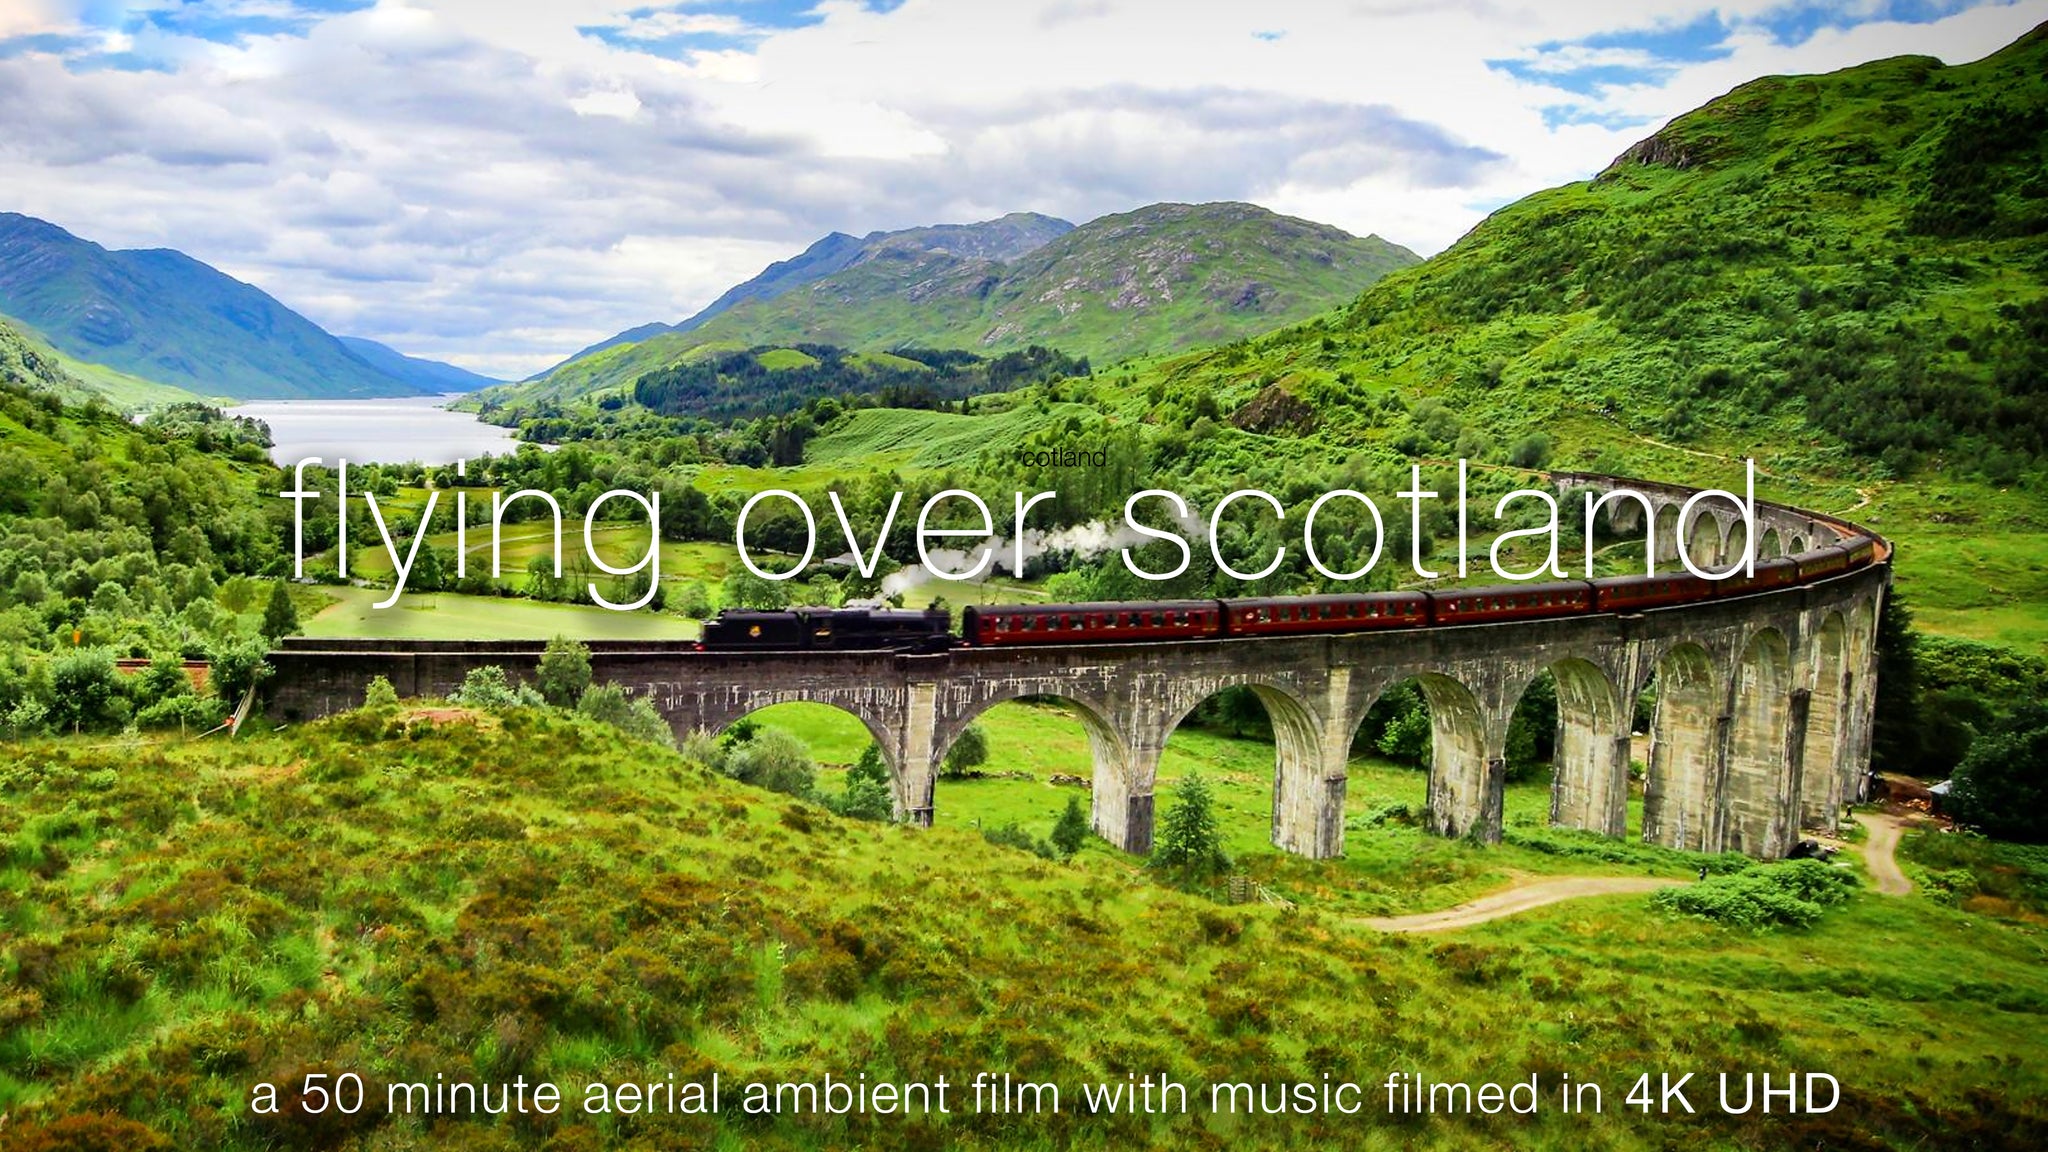 Flying Over Scotland" Highlands 1 HR Aerial 4K Nature Film + Music Nature Relaxation™ by David Huting